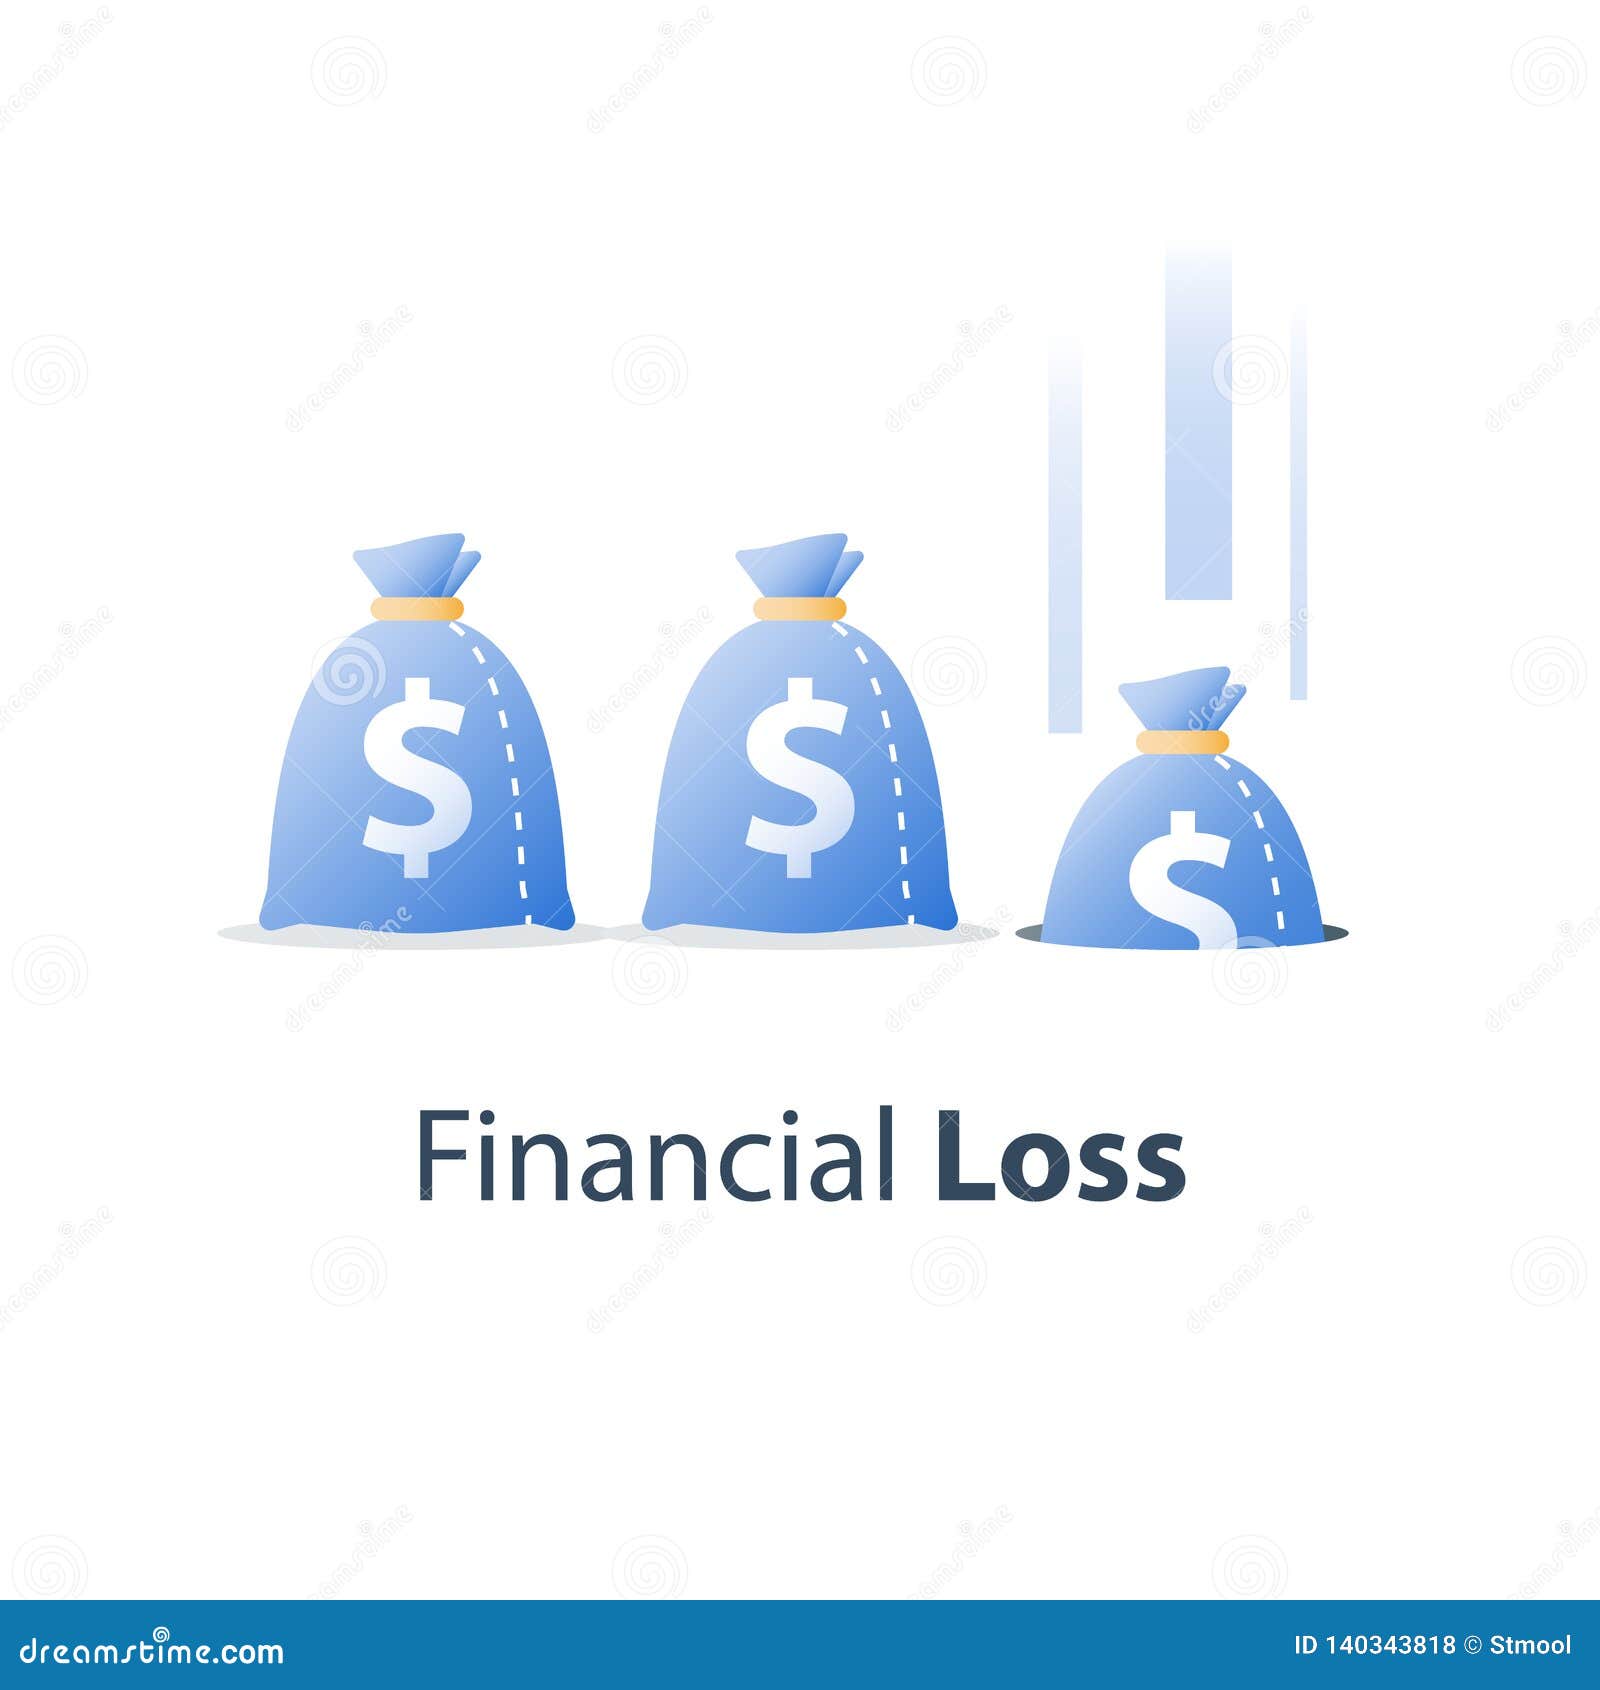 money loss, sunken cost concept, lack of finance, stock market fall, investment hedge fund, wealth devaluation, income decrease